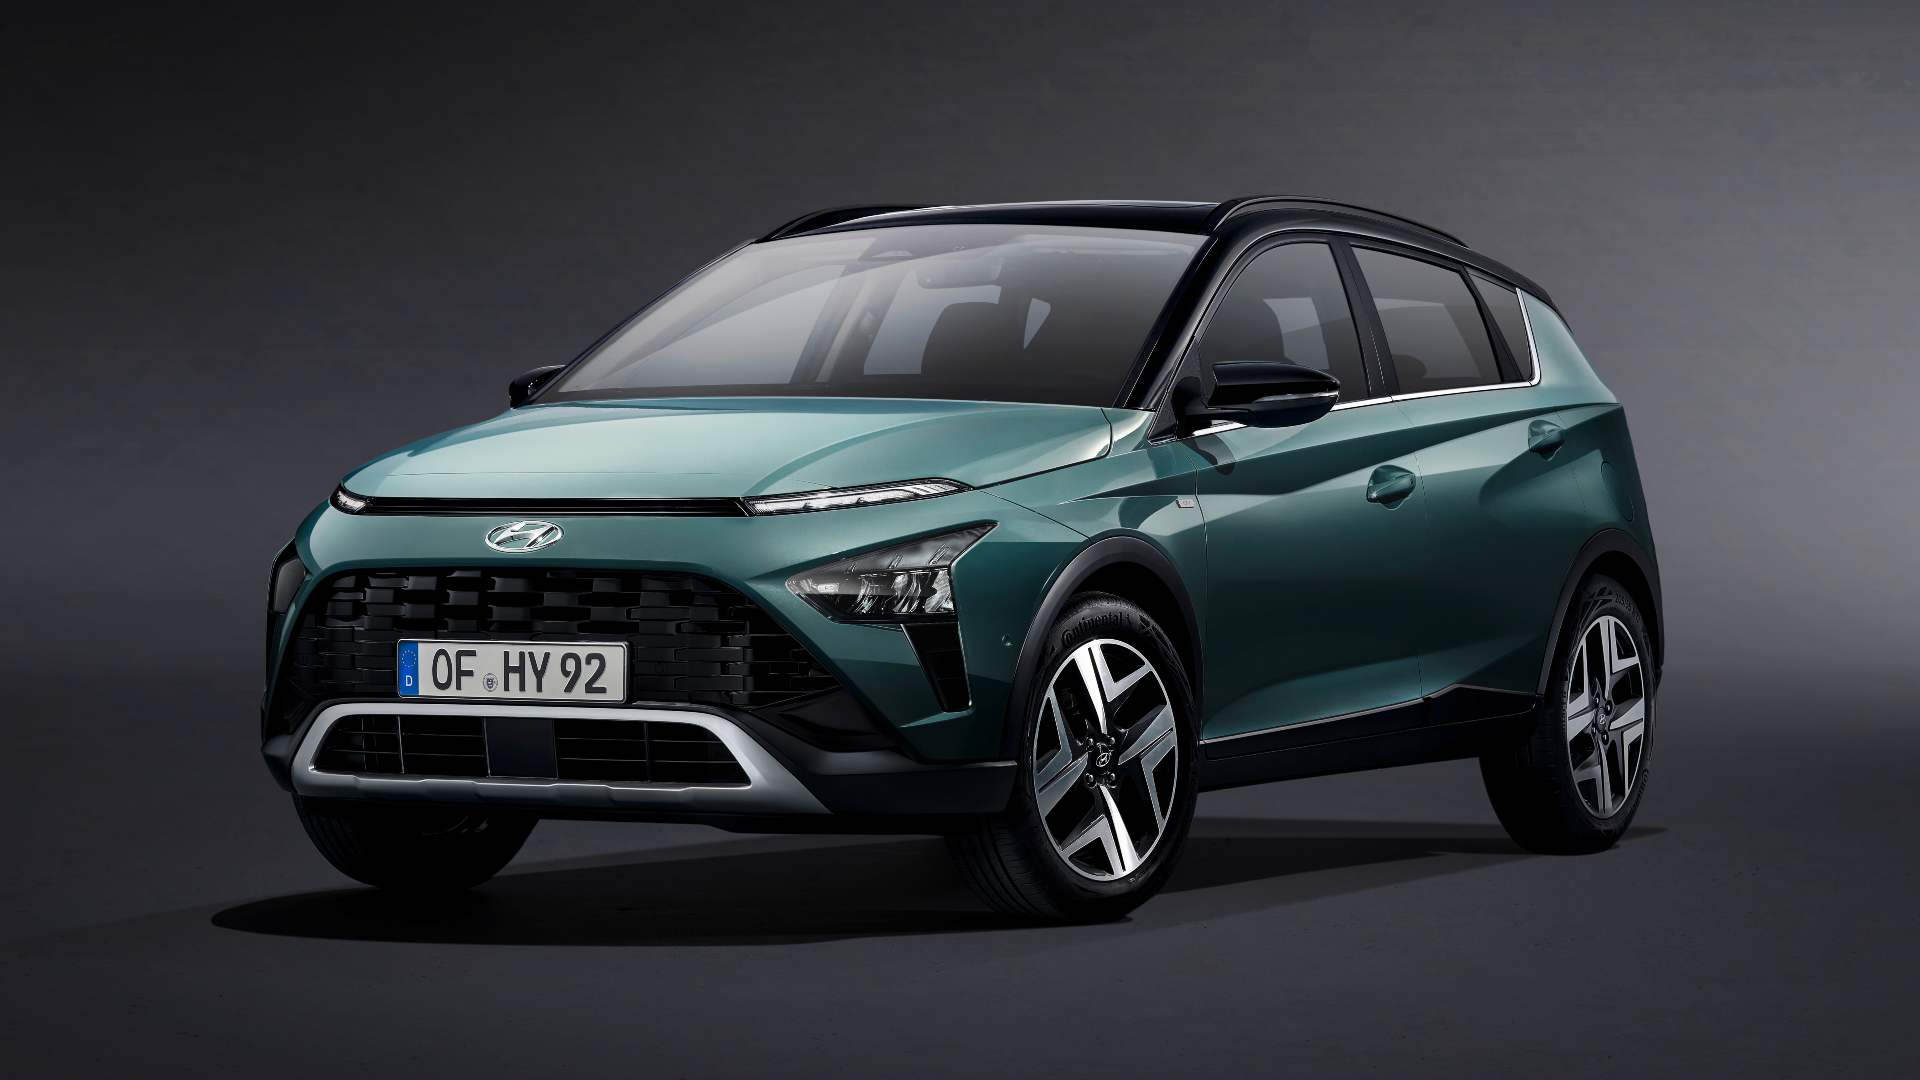 You are currently viewing Hyundai Bayon is a small crossover for Europe based on the new-gen i20- Technology News, FP